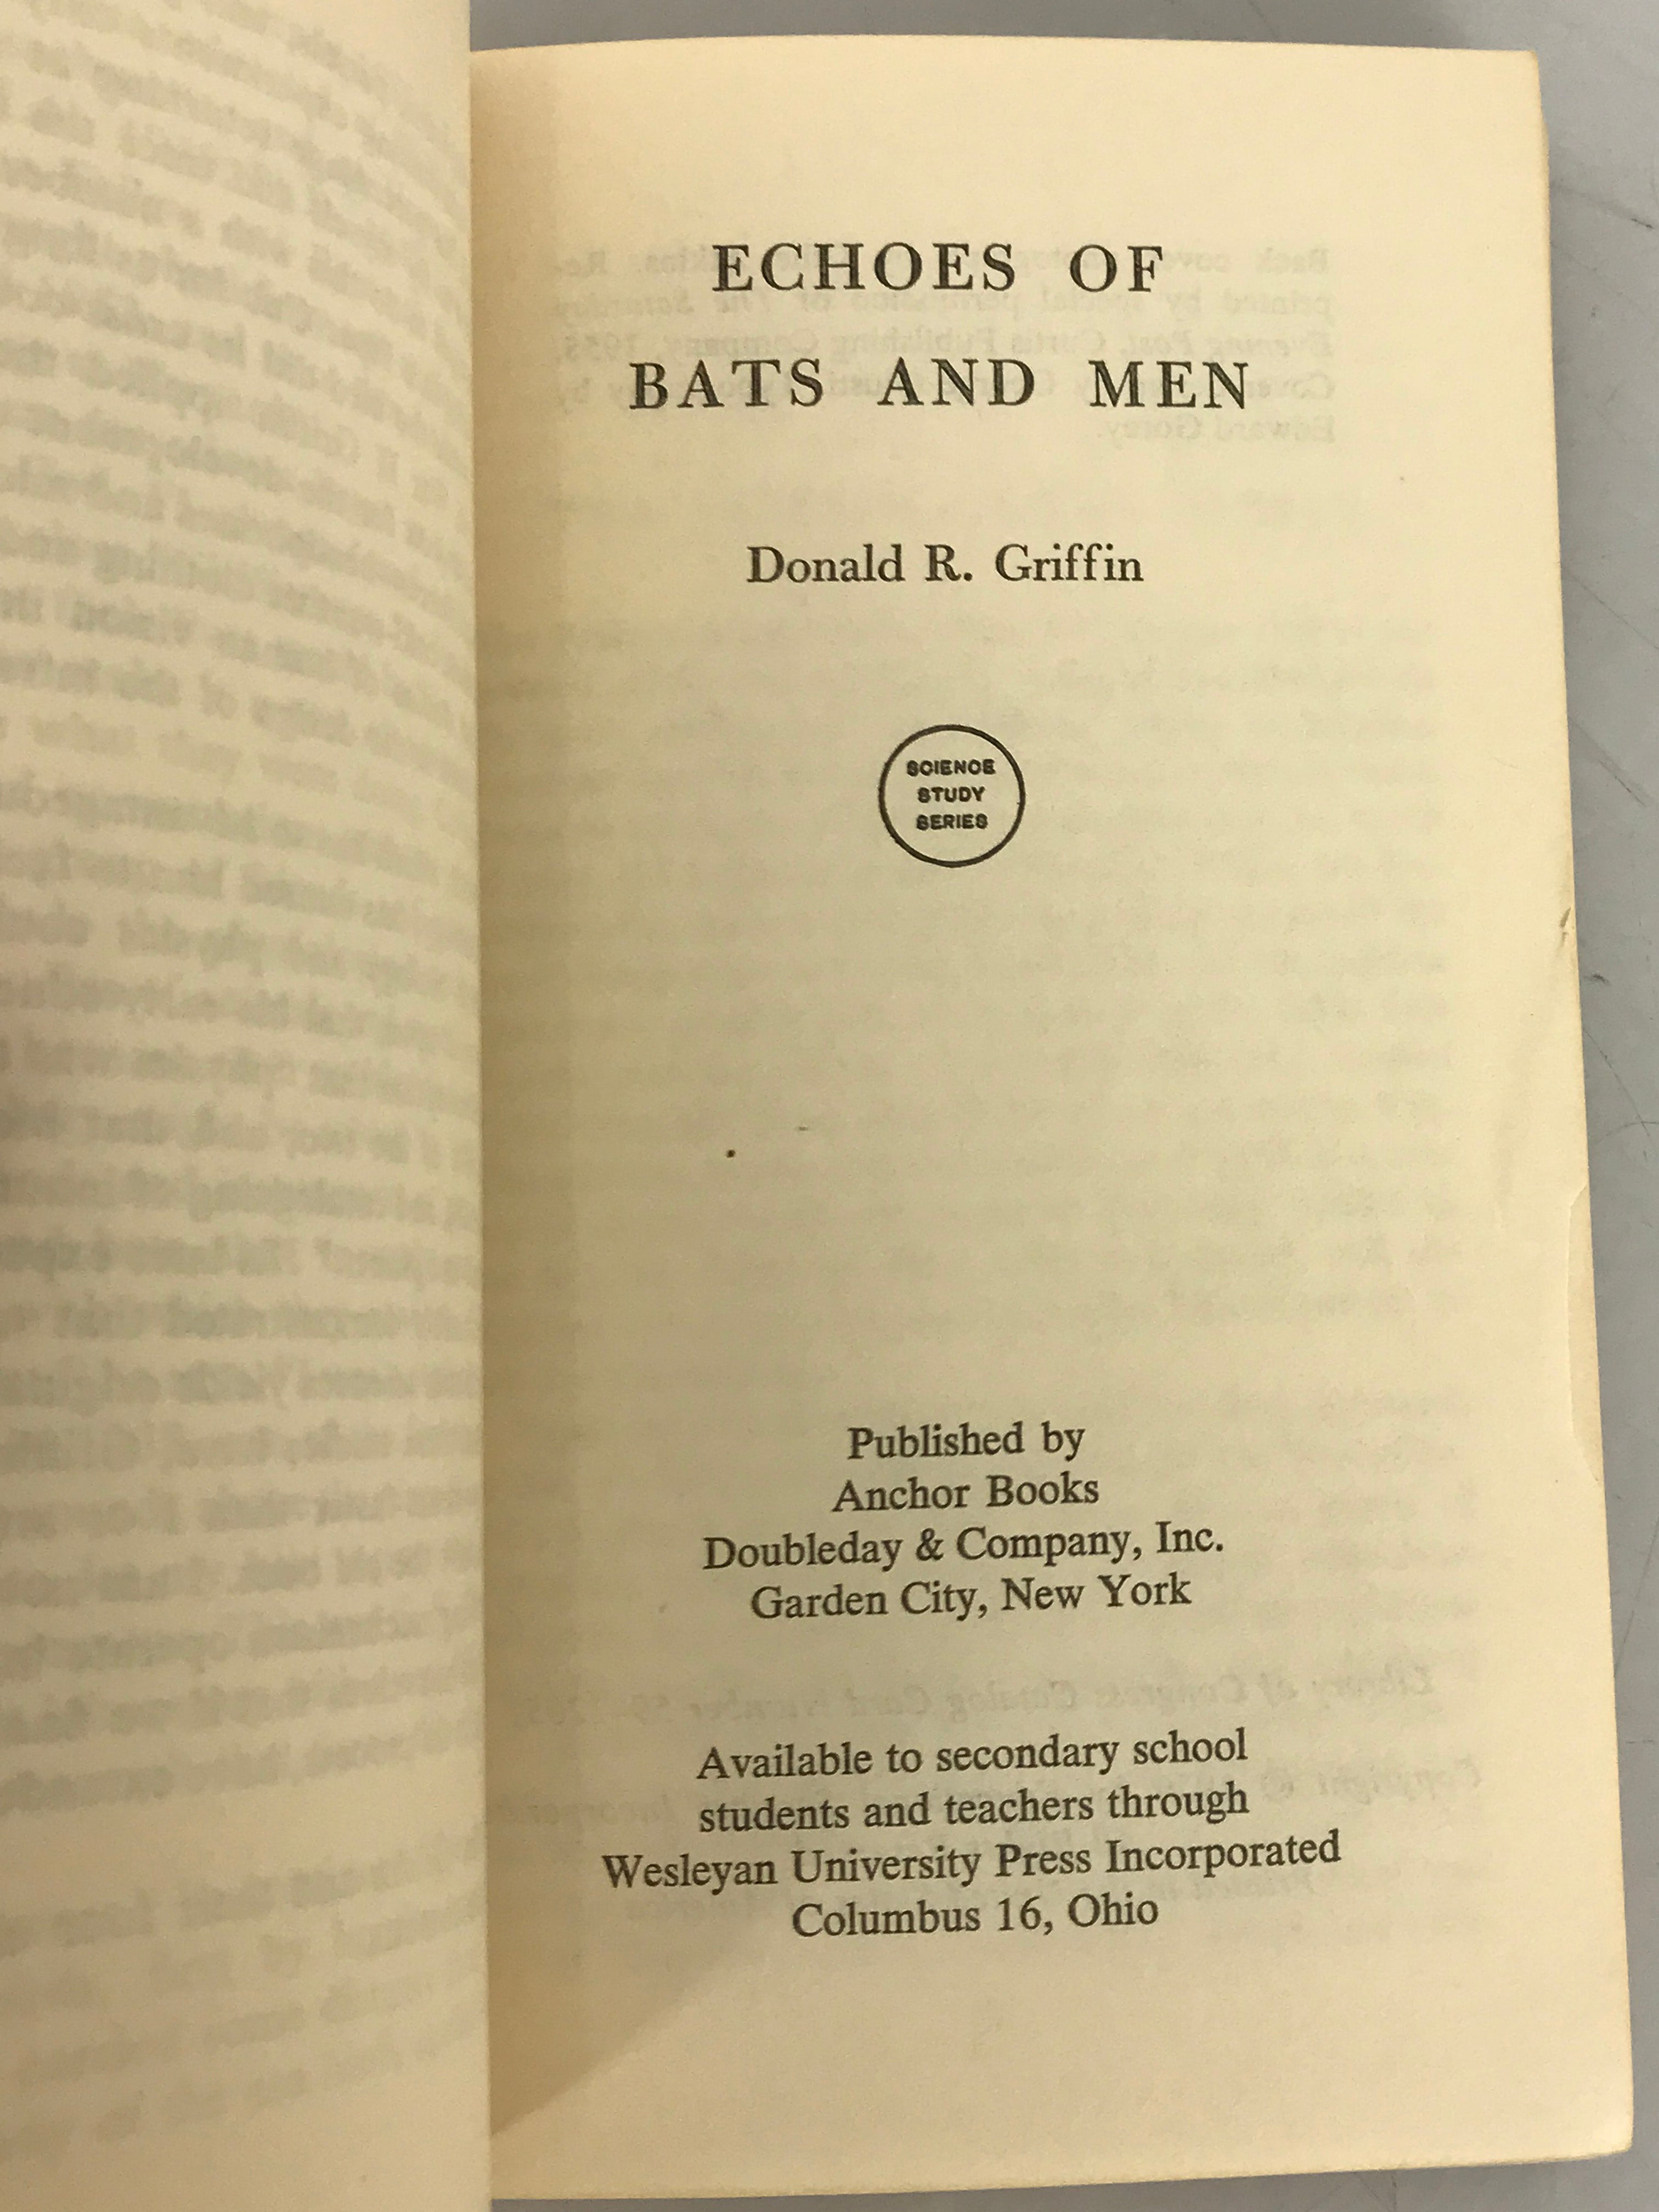 Vintage Echoes of Bats and Men by Donald R. Griffin 1959 SC